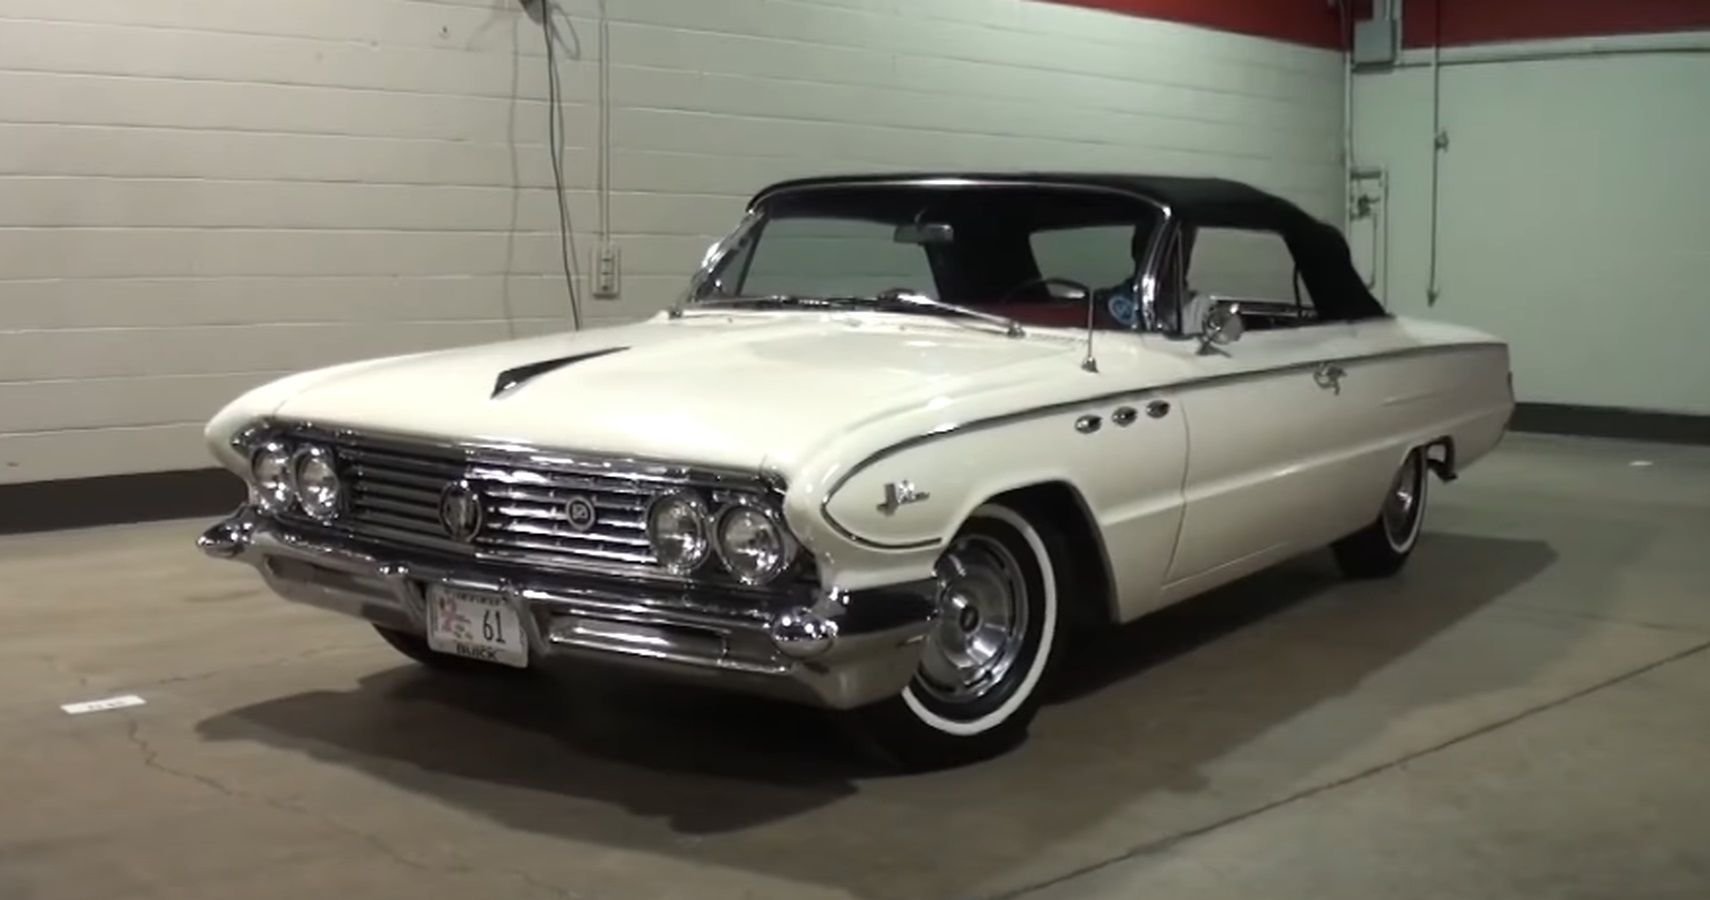 This Refined 1961 LeSabre Convertible Reminds Us Of A Buick That Once Was